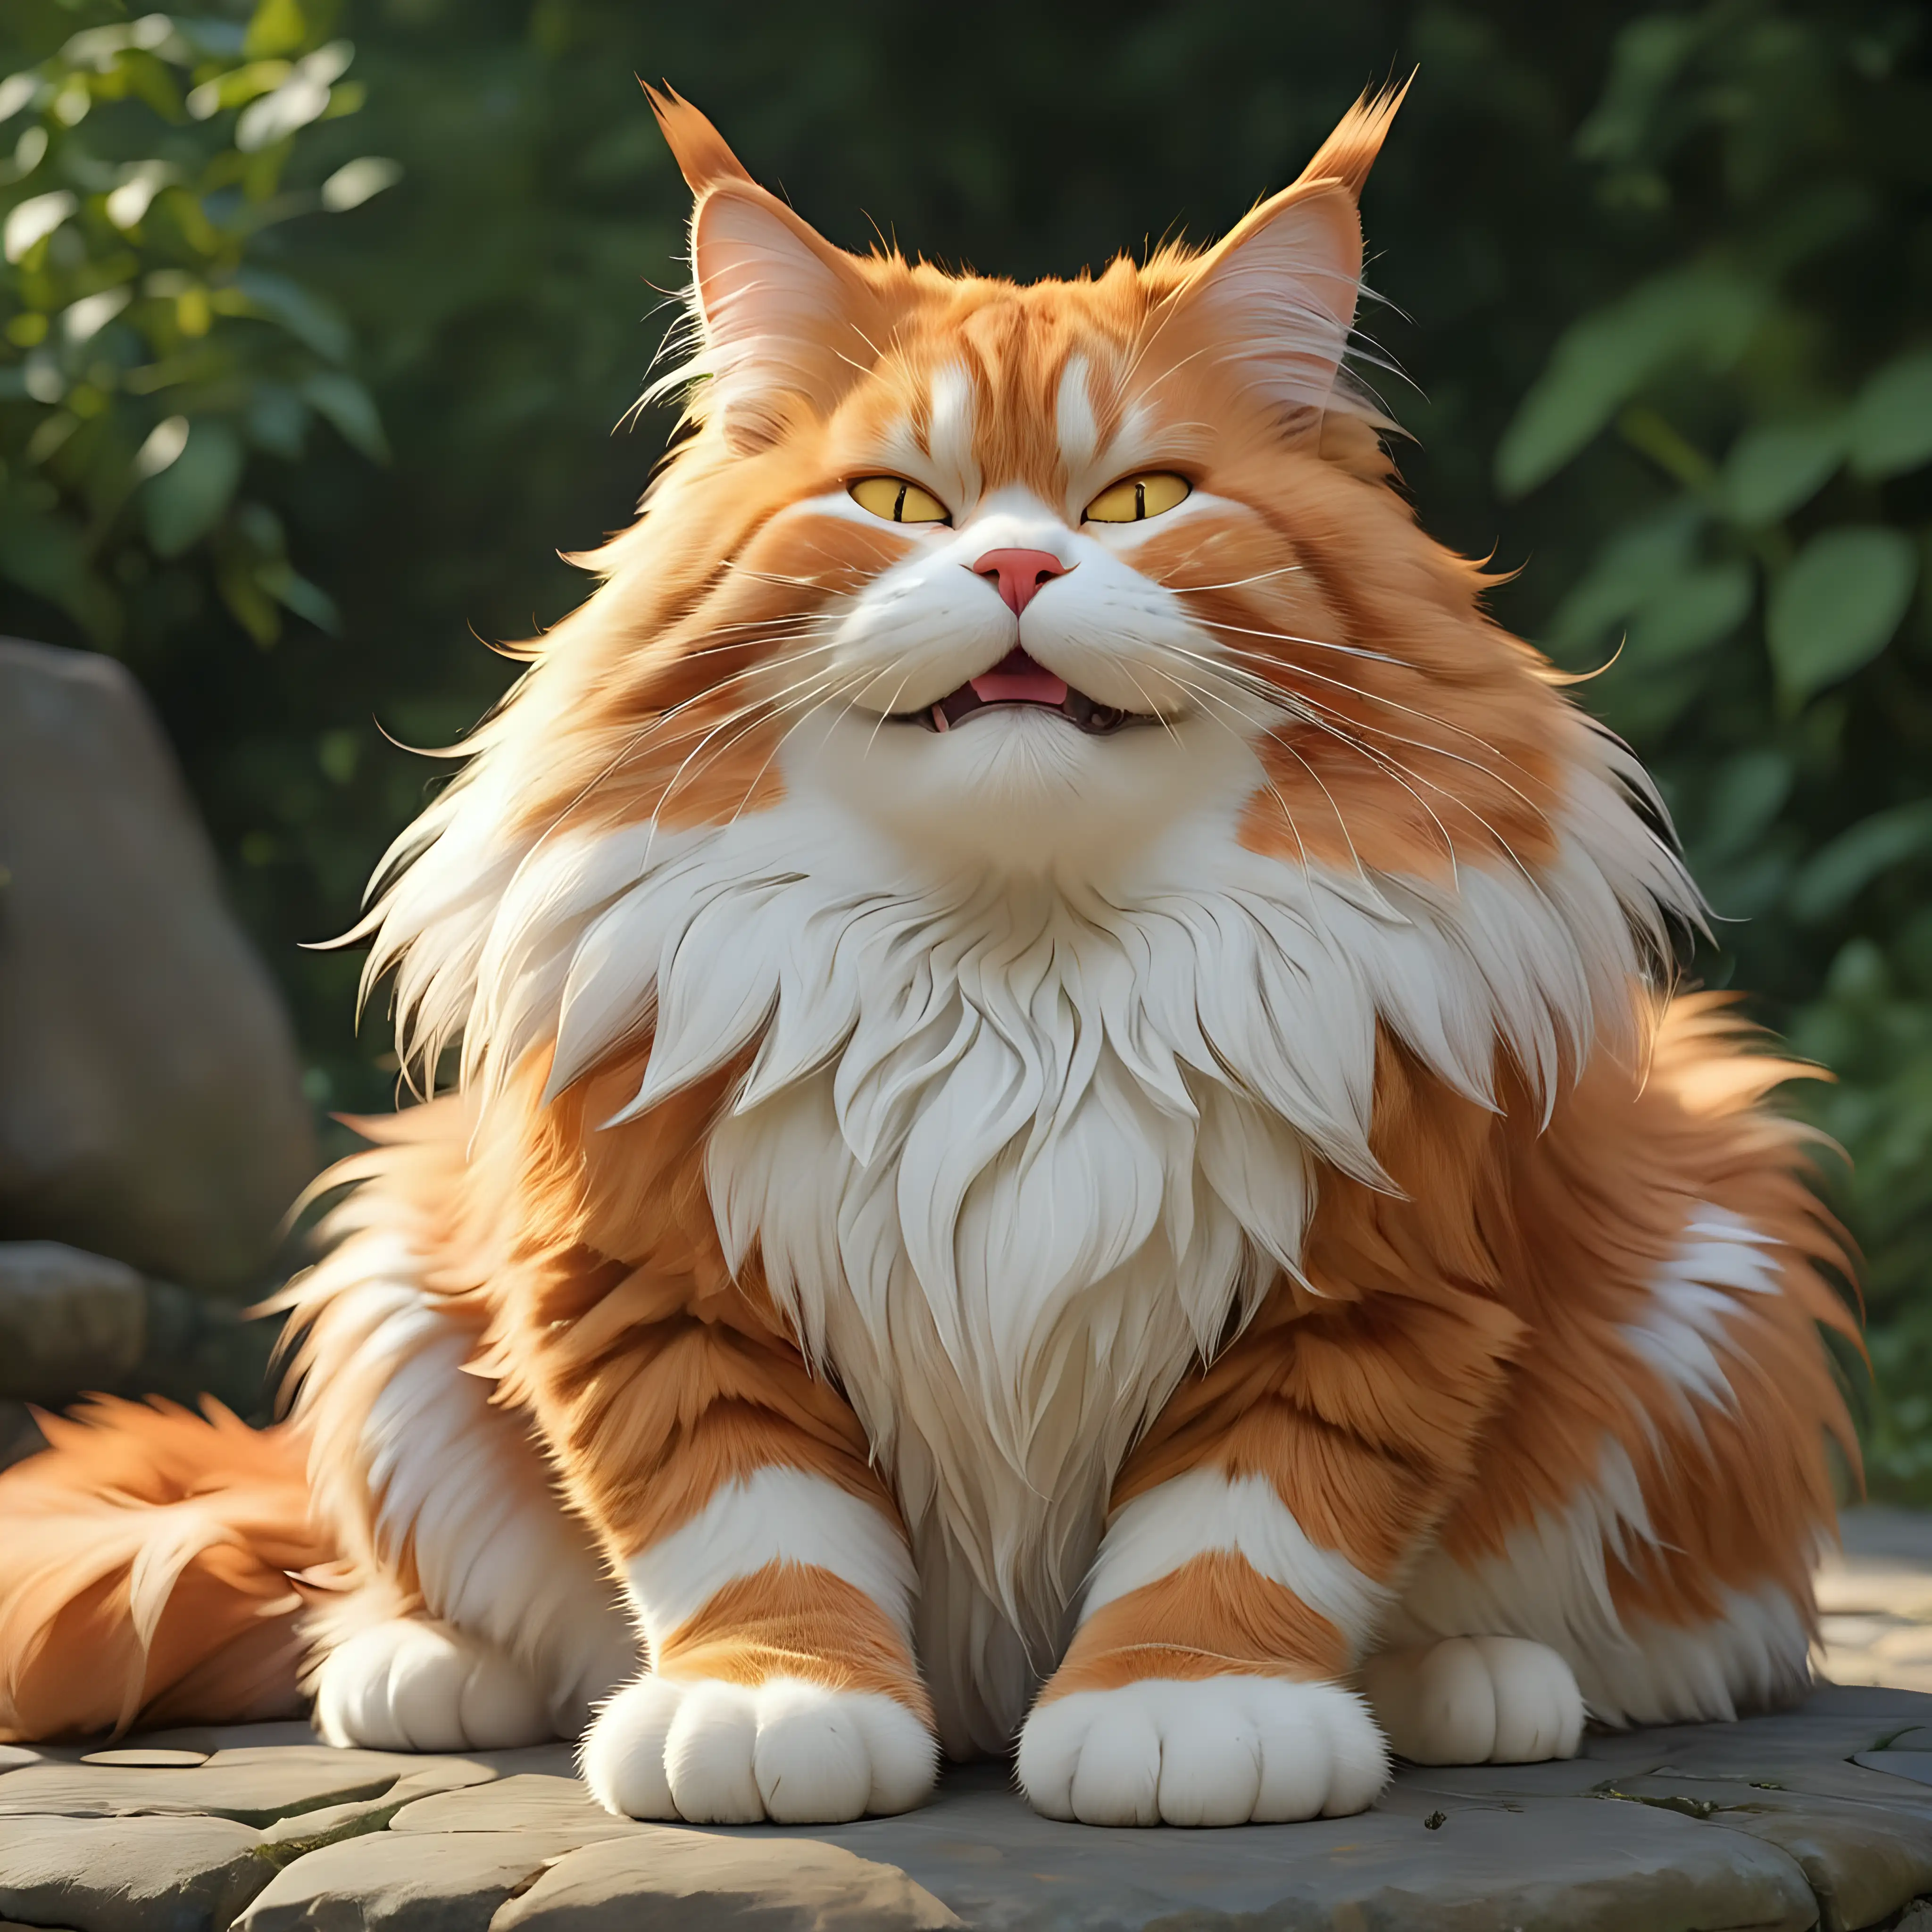 Chubby Maine Coon Cat with Satisfied Expression in Upscale Environment